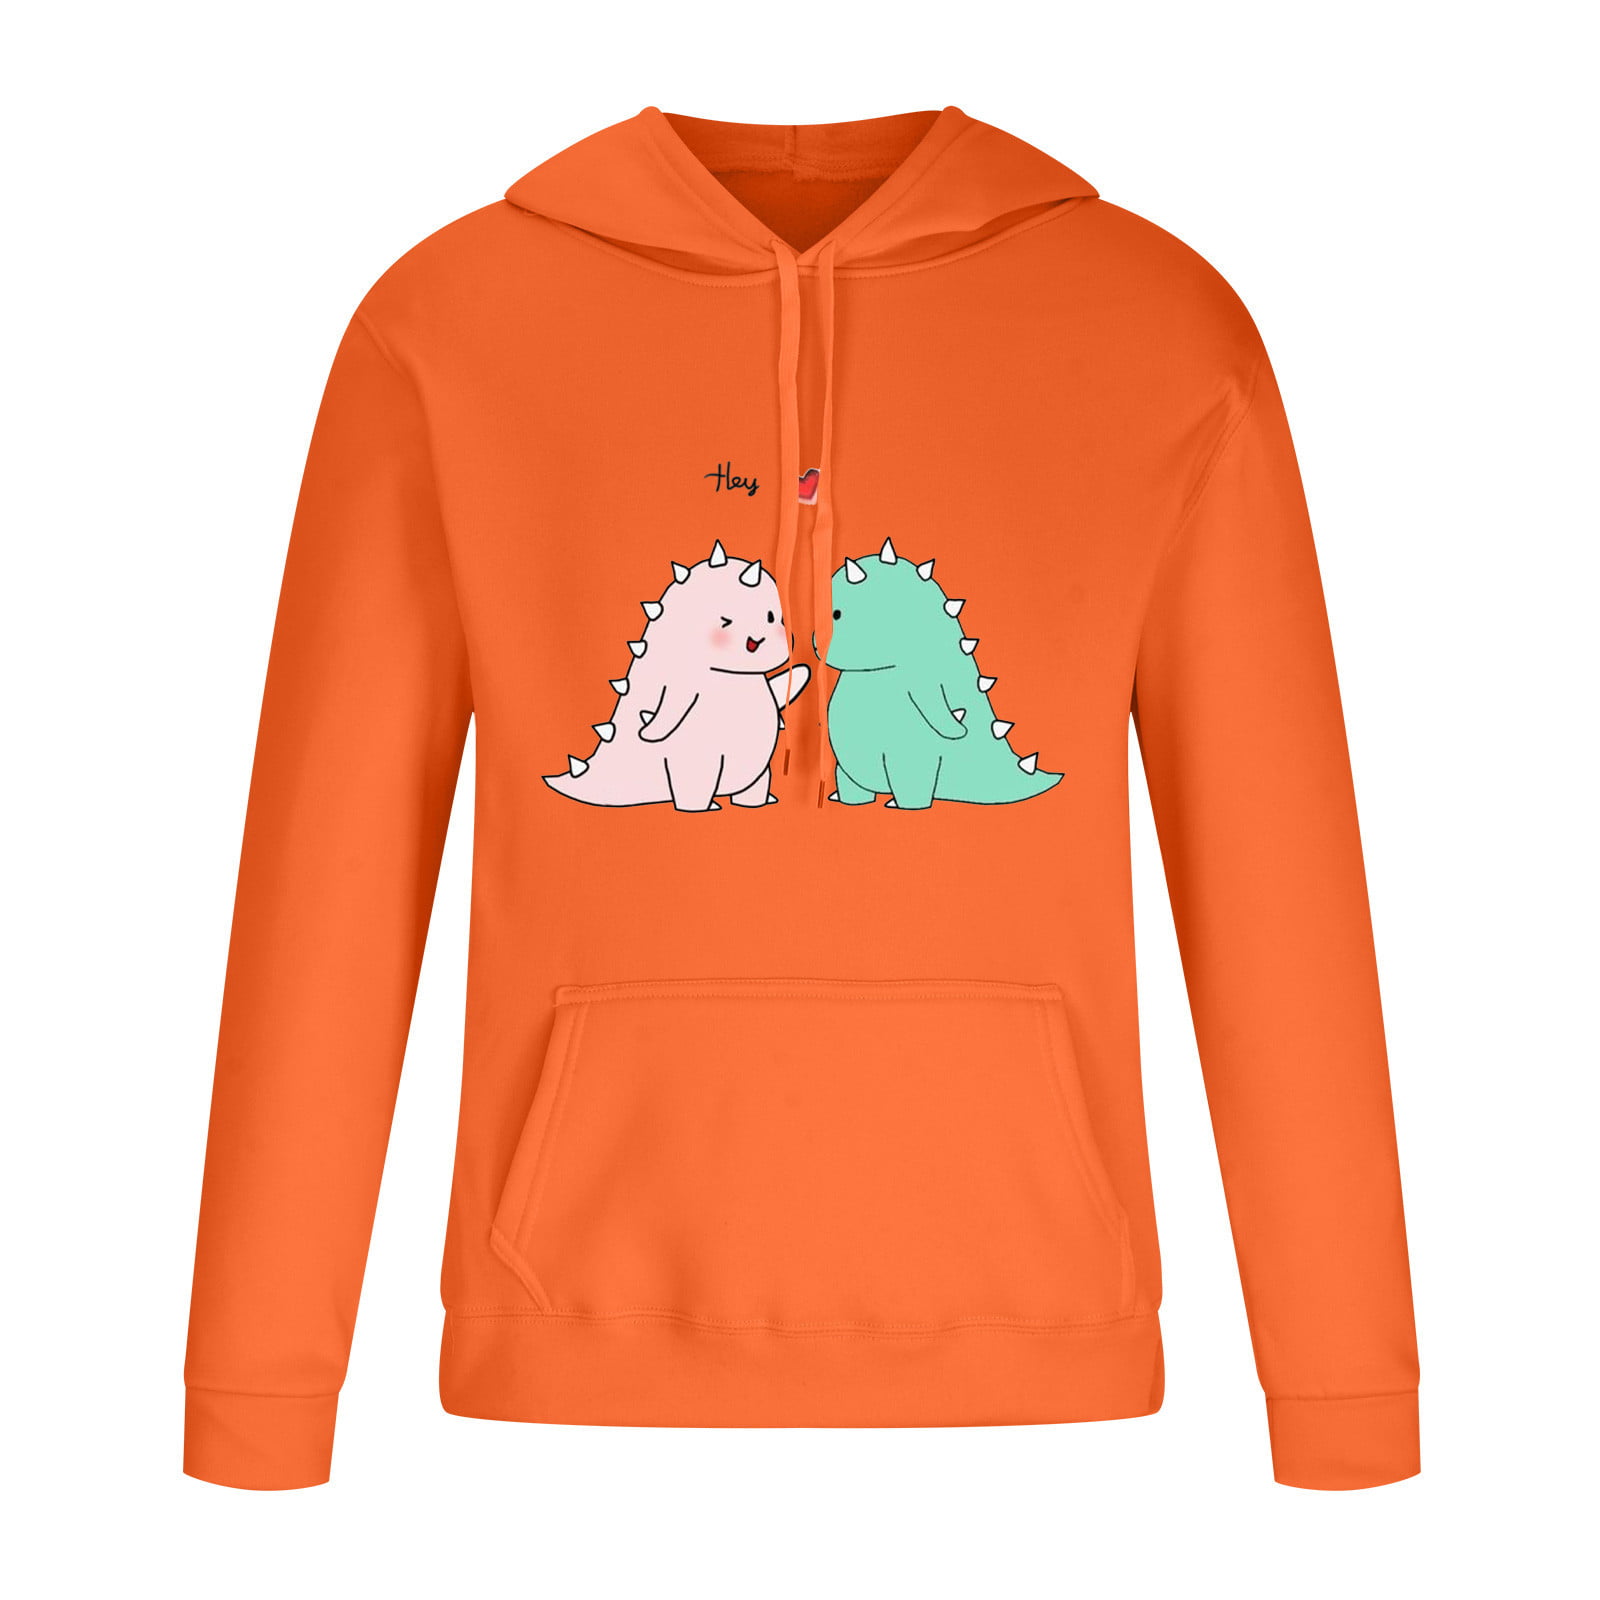 RQYYD Clearance Cute Dinosaur Graphic Hoodies and Sweatpants Set Men Women  Teen Girls Casual Sport Outfits Drawstring Jogger Tracksuits Top Orange 3XL